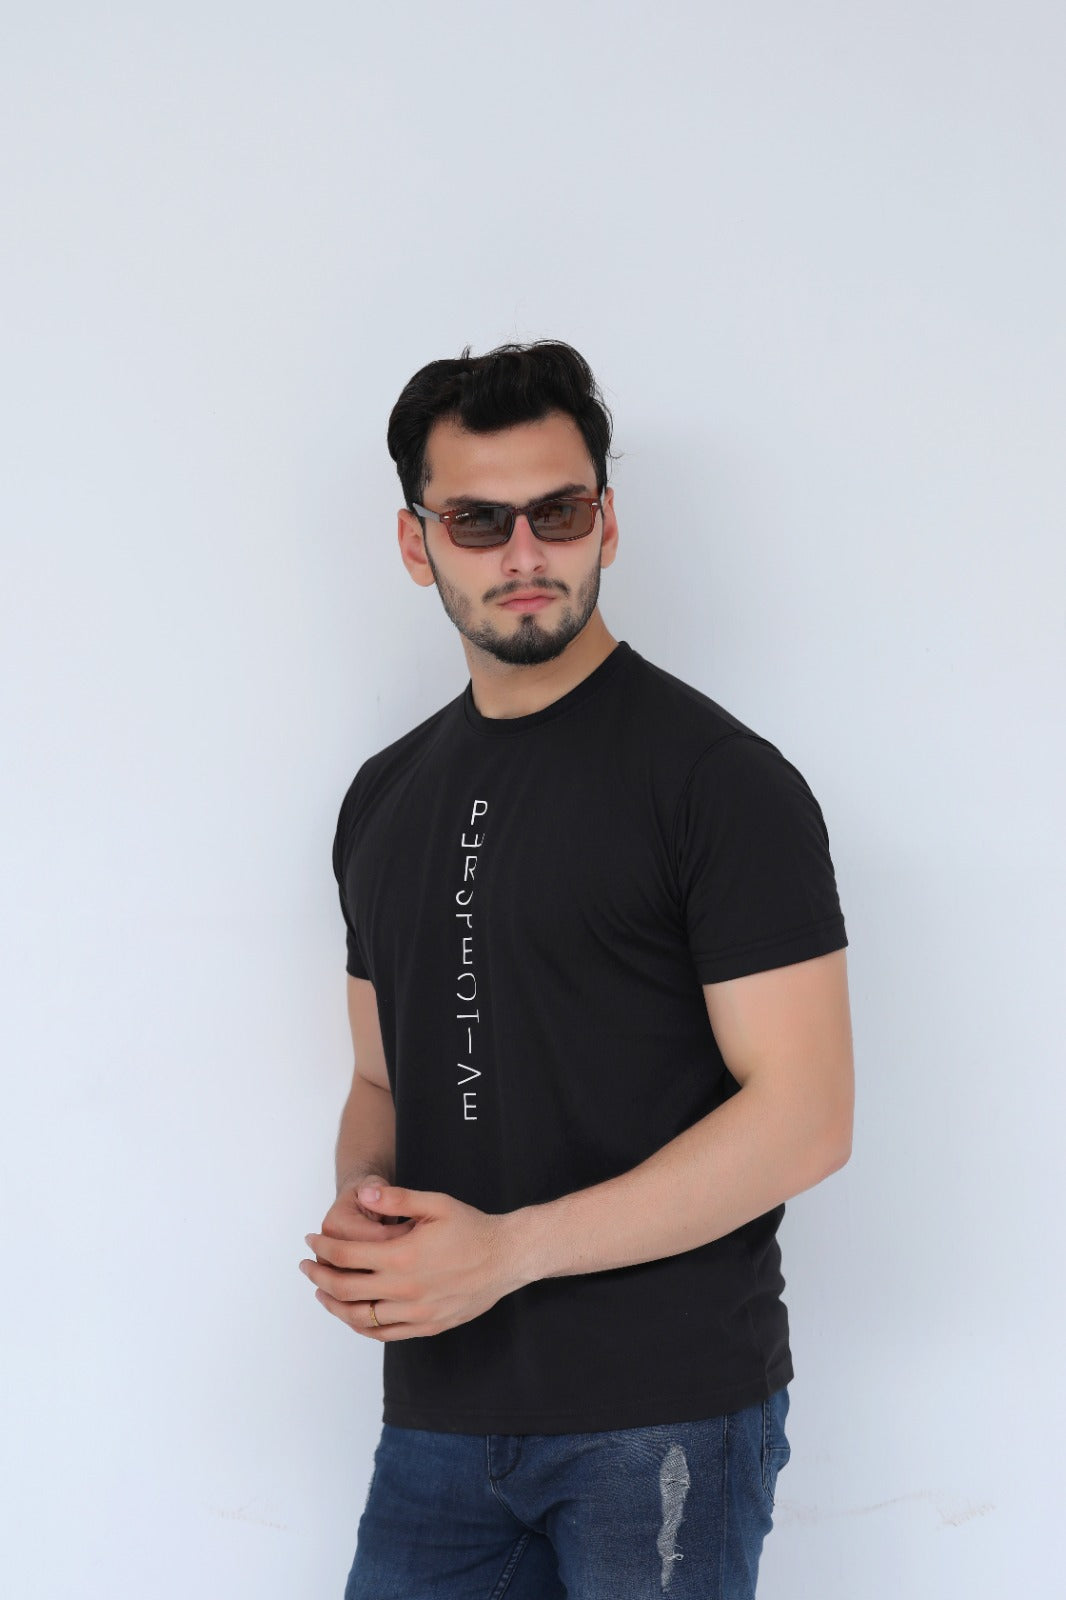 Perspective Printed Tee For Him.-MTST-0047-Black